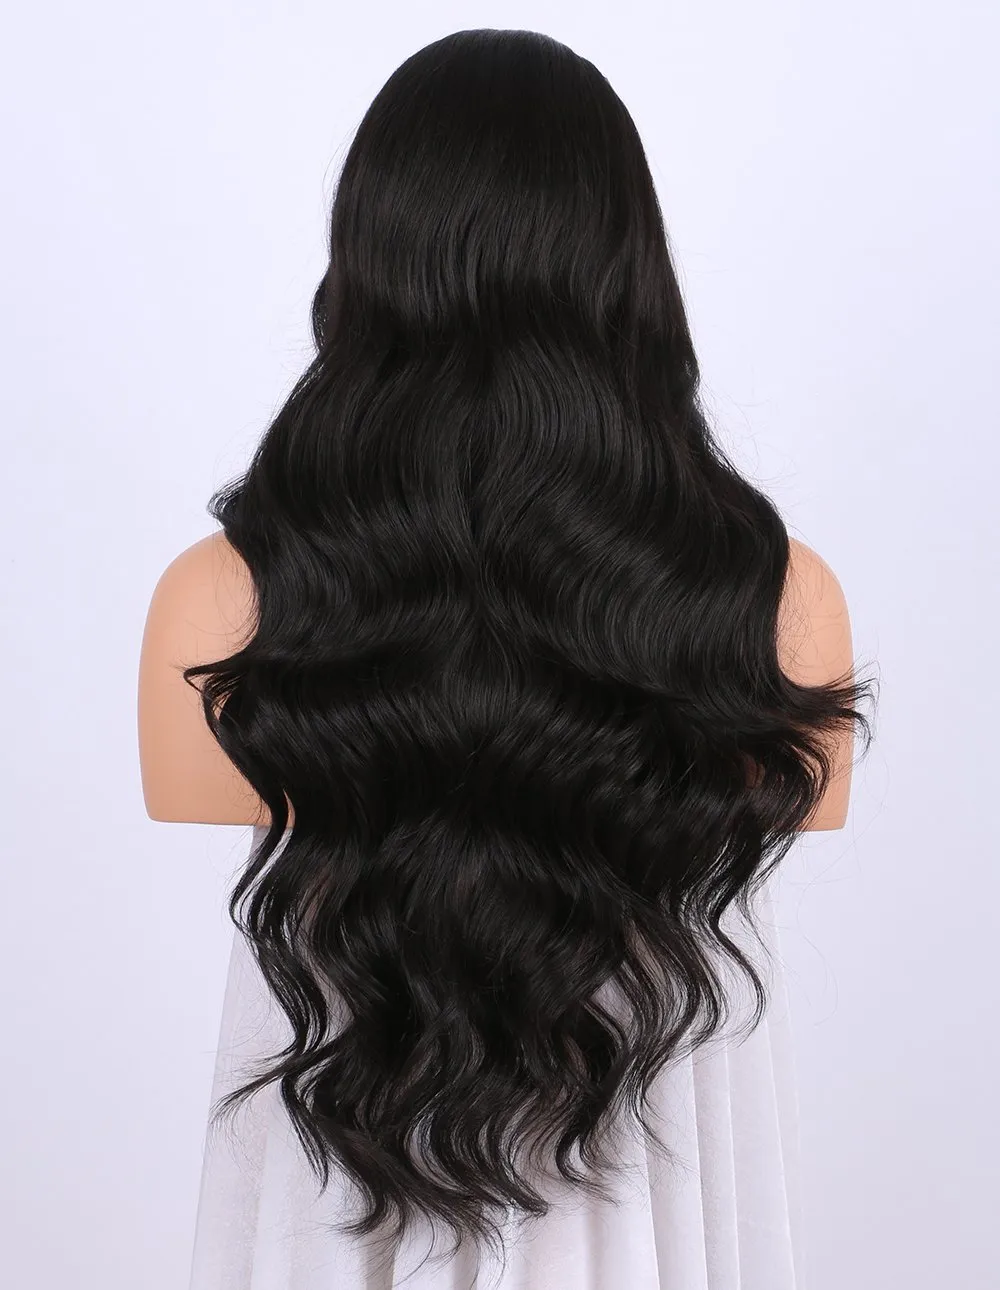 Synthetic Wigs for women Natural Looking Long Wavy Right Side Parting Heat Resistant Replacement Wig 24 inches8939626